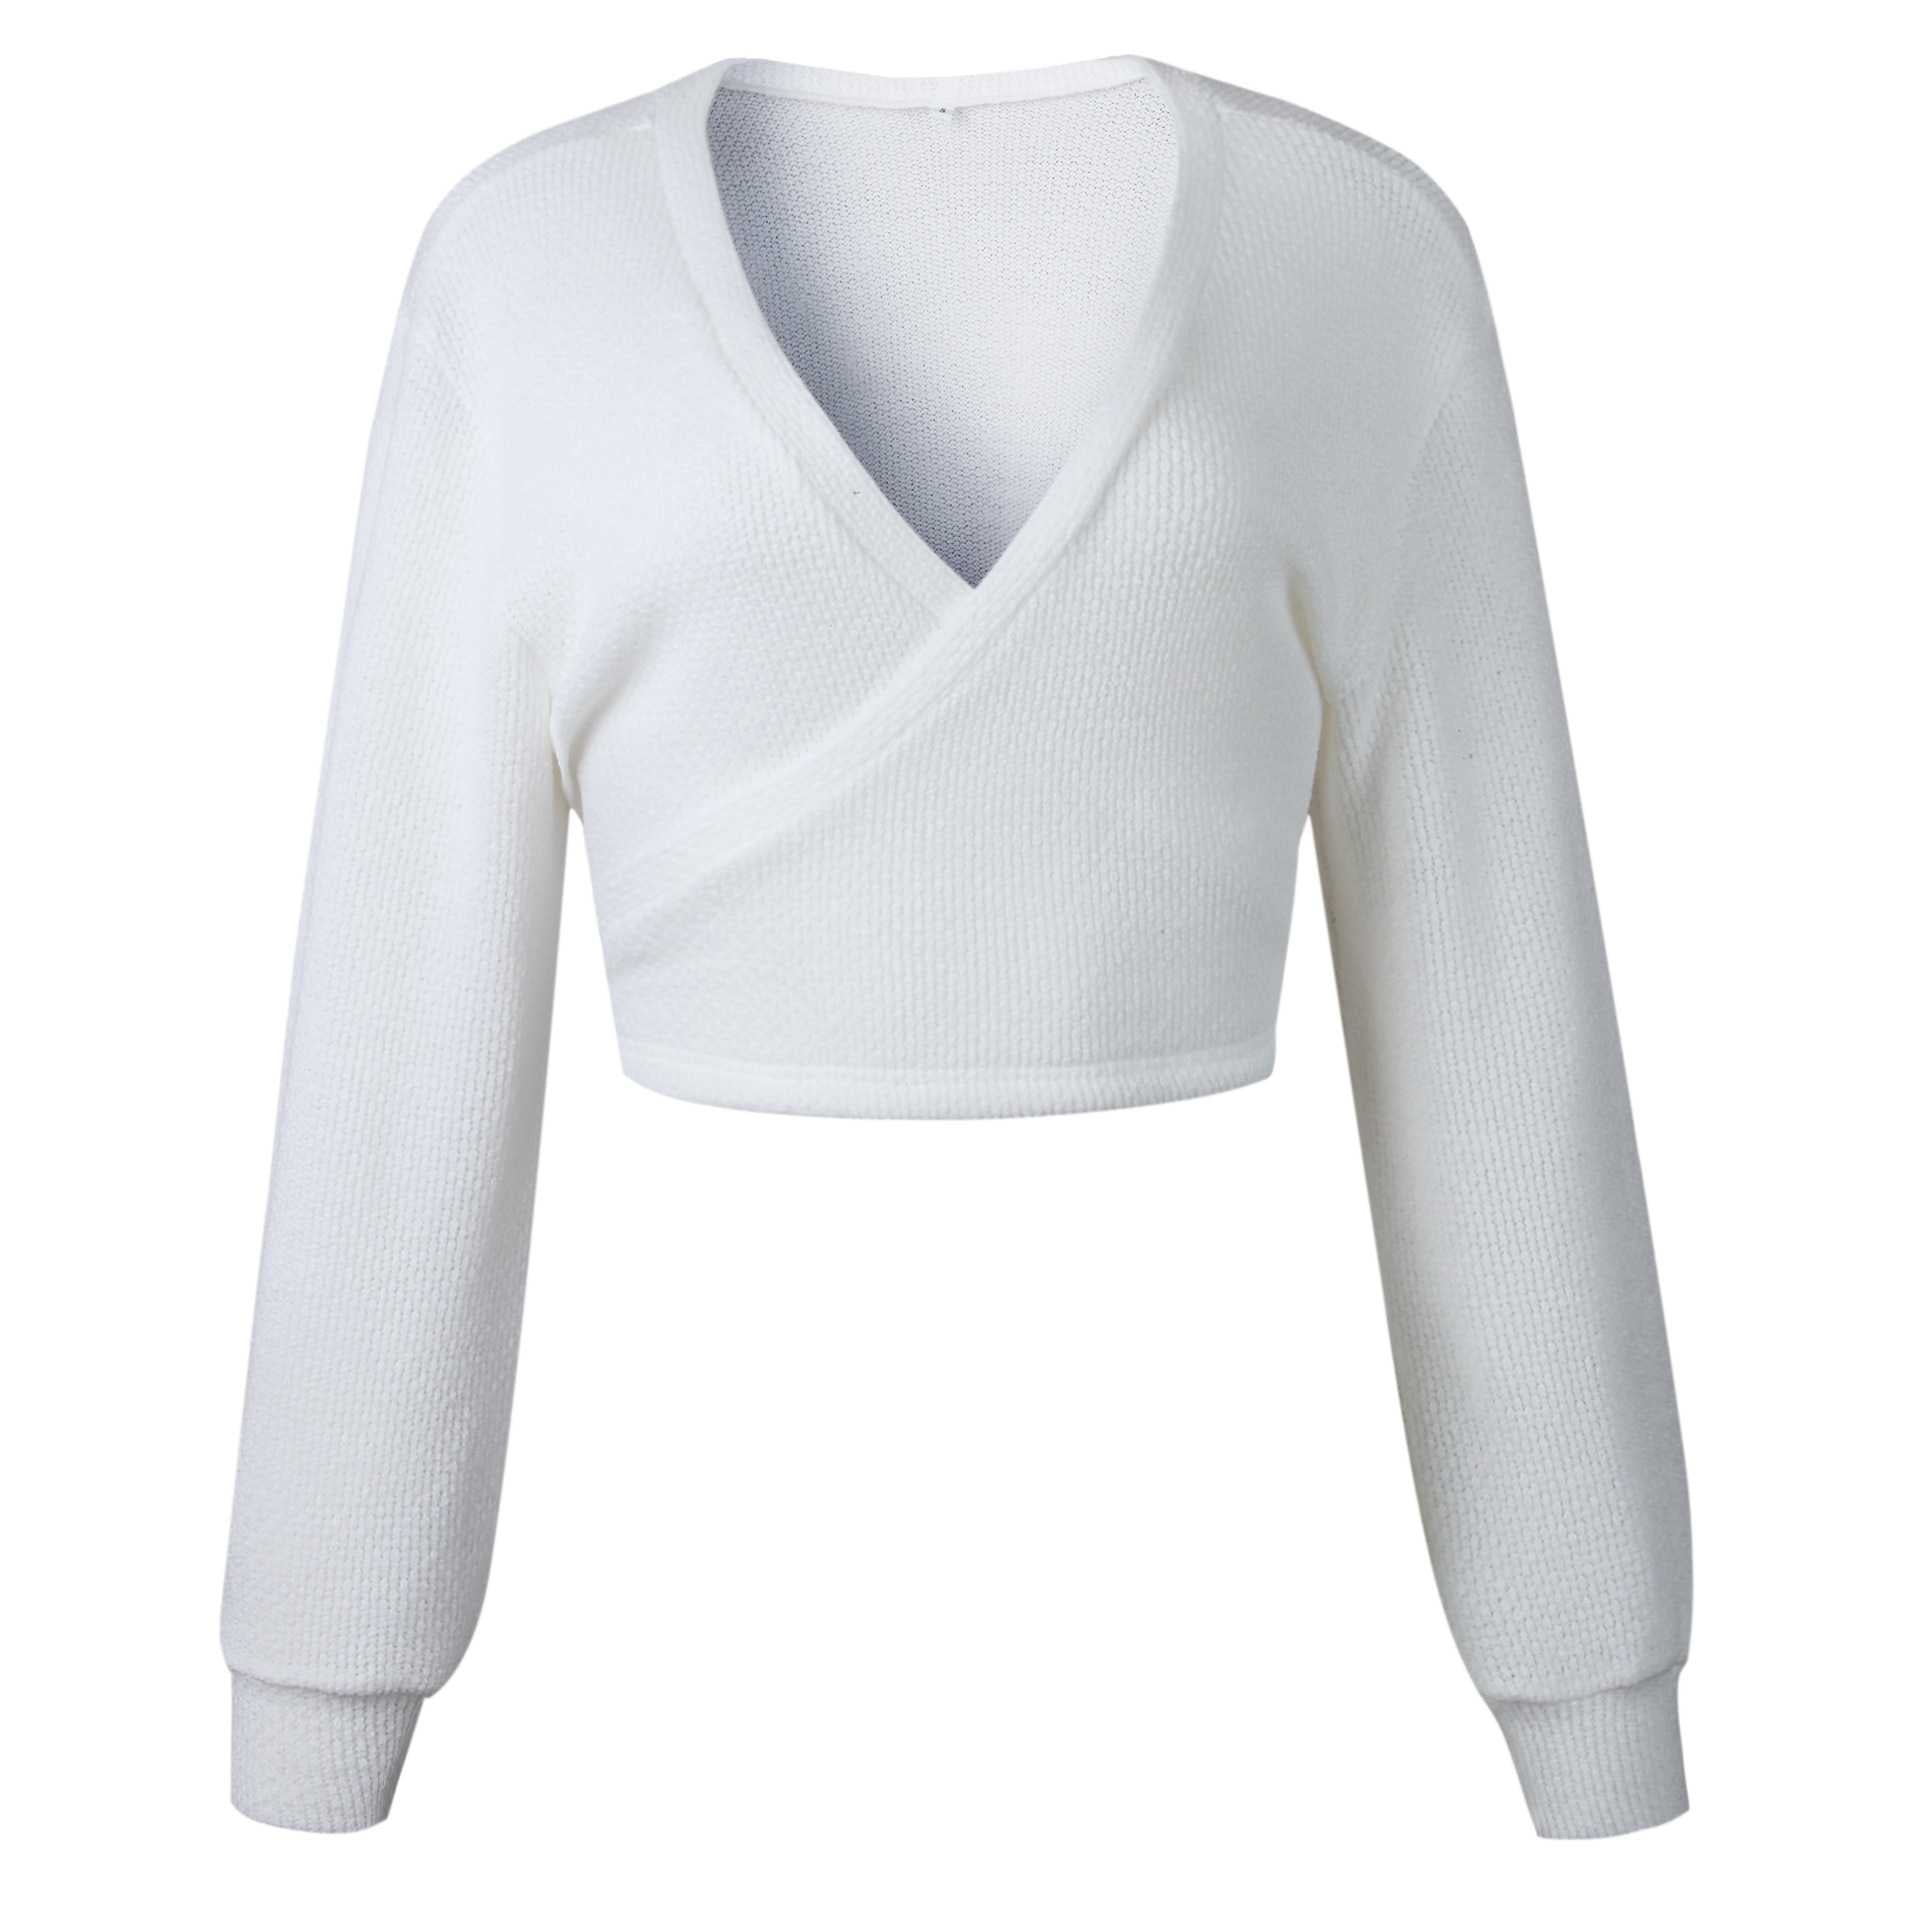 White wrap front sweater pattern template